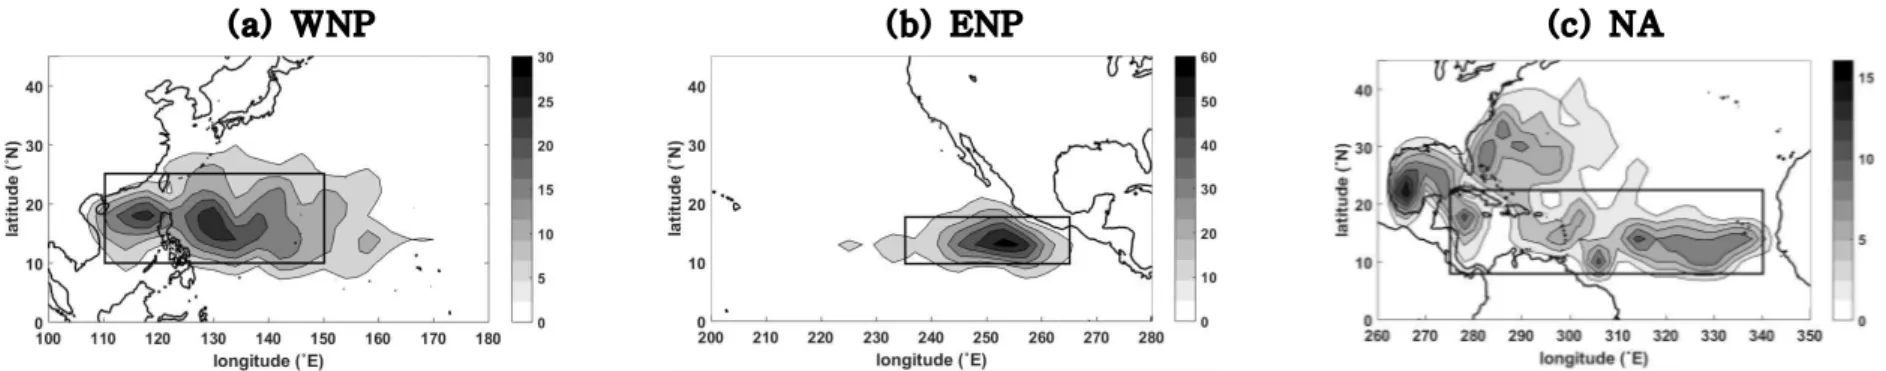 Fig. 2. Genesis locations of tropical cyclones (TC) over the (a) western North Pacific, (b) eastern North Pacific, and (c) North Atlantic basins in JASO (July, August, September, and October)